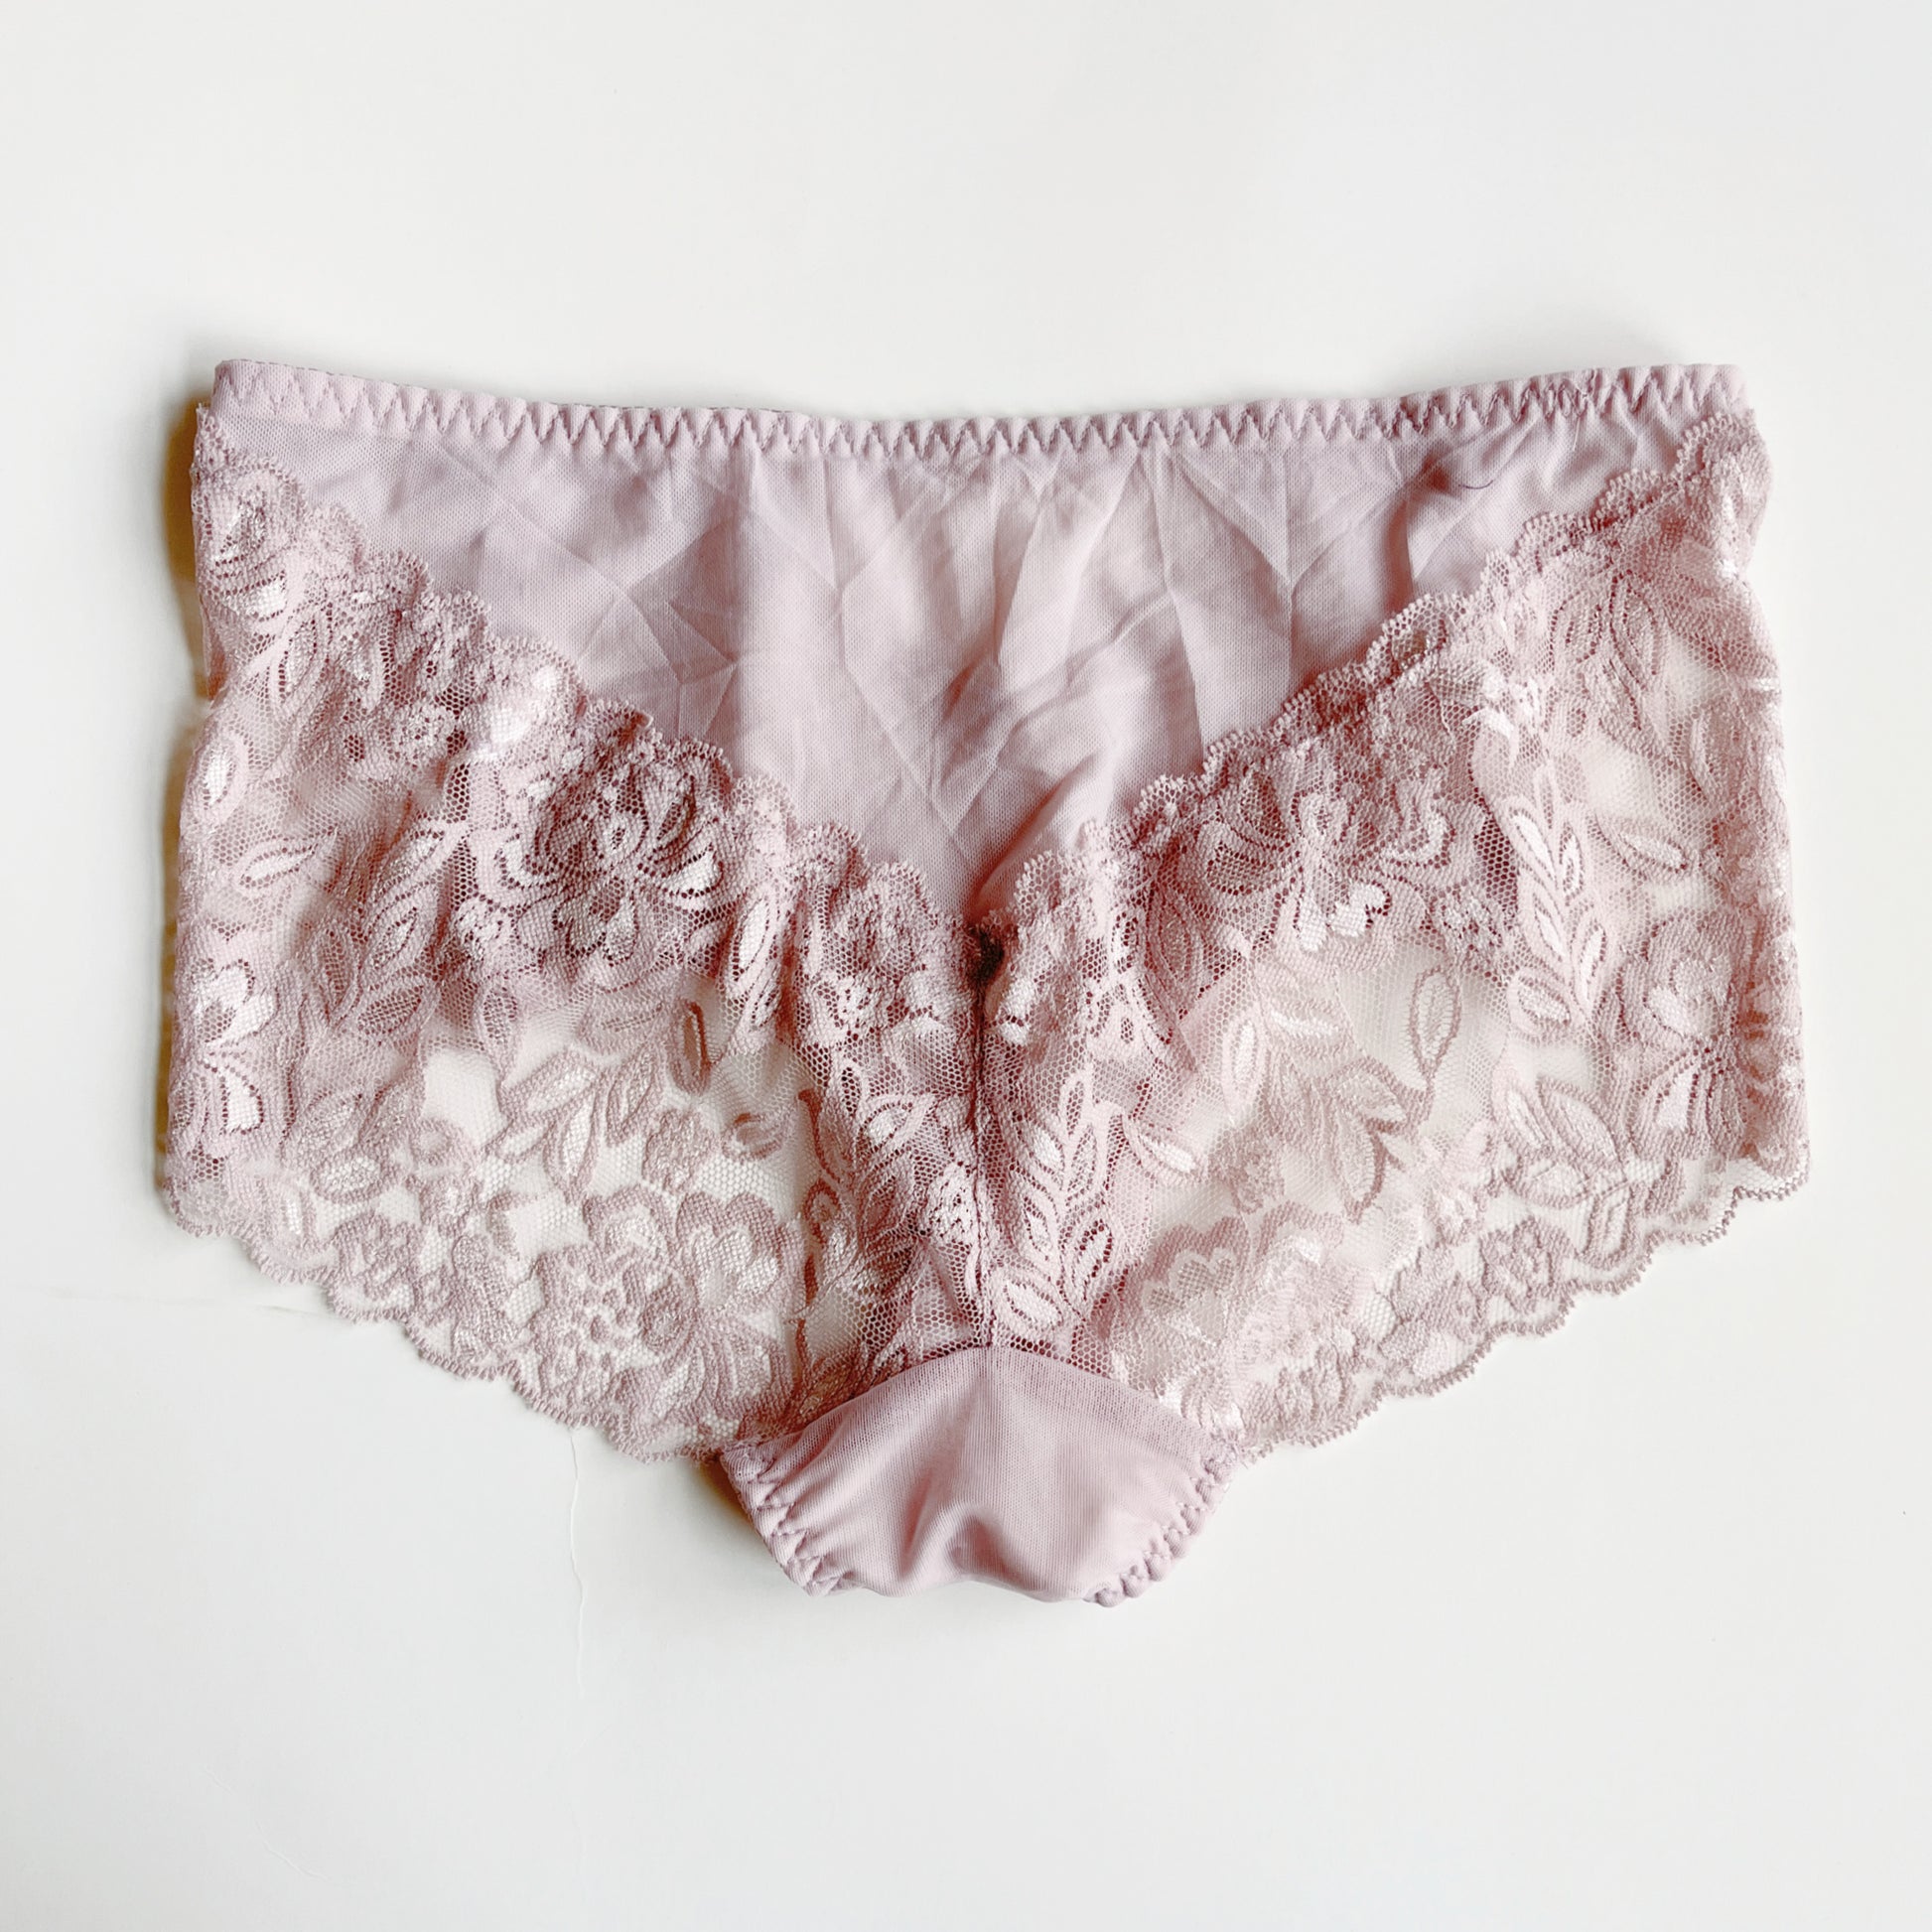 full coverage silk panties high waist | Made in Canada scalloped lace underwear 